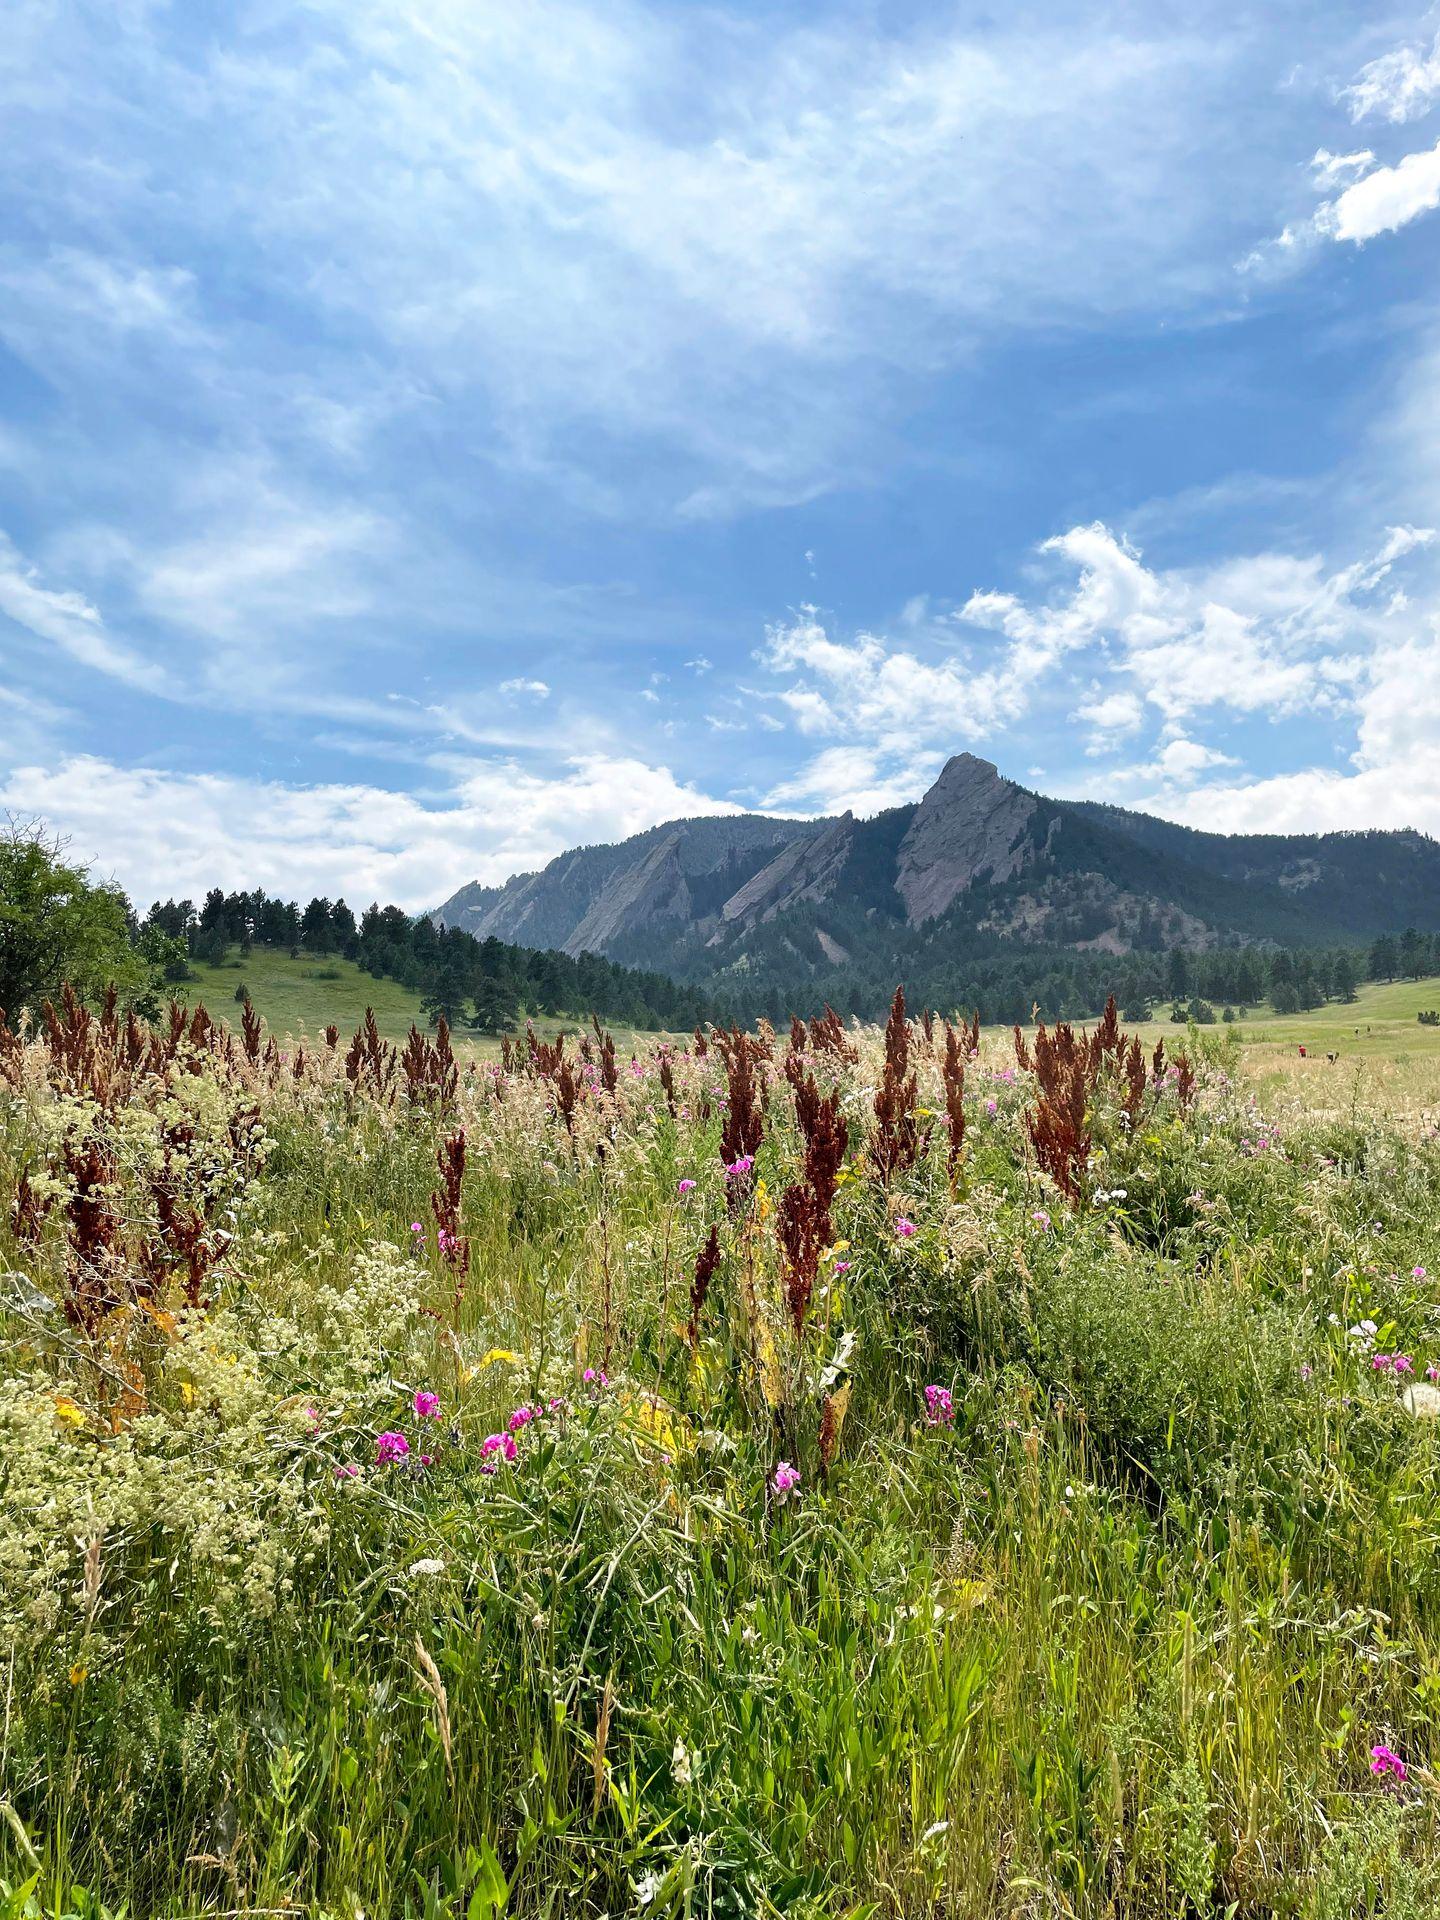 A meadow of wildflowers with the Flatirons in the distance.